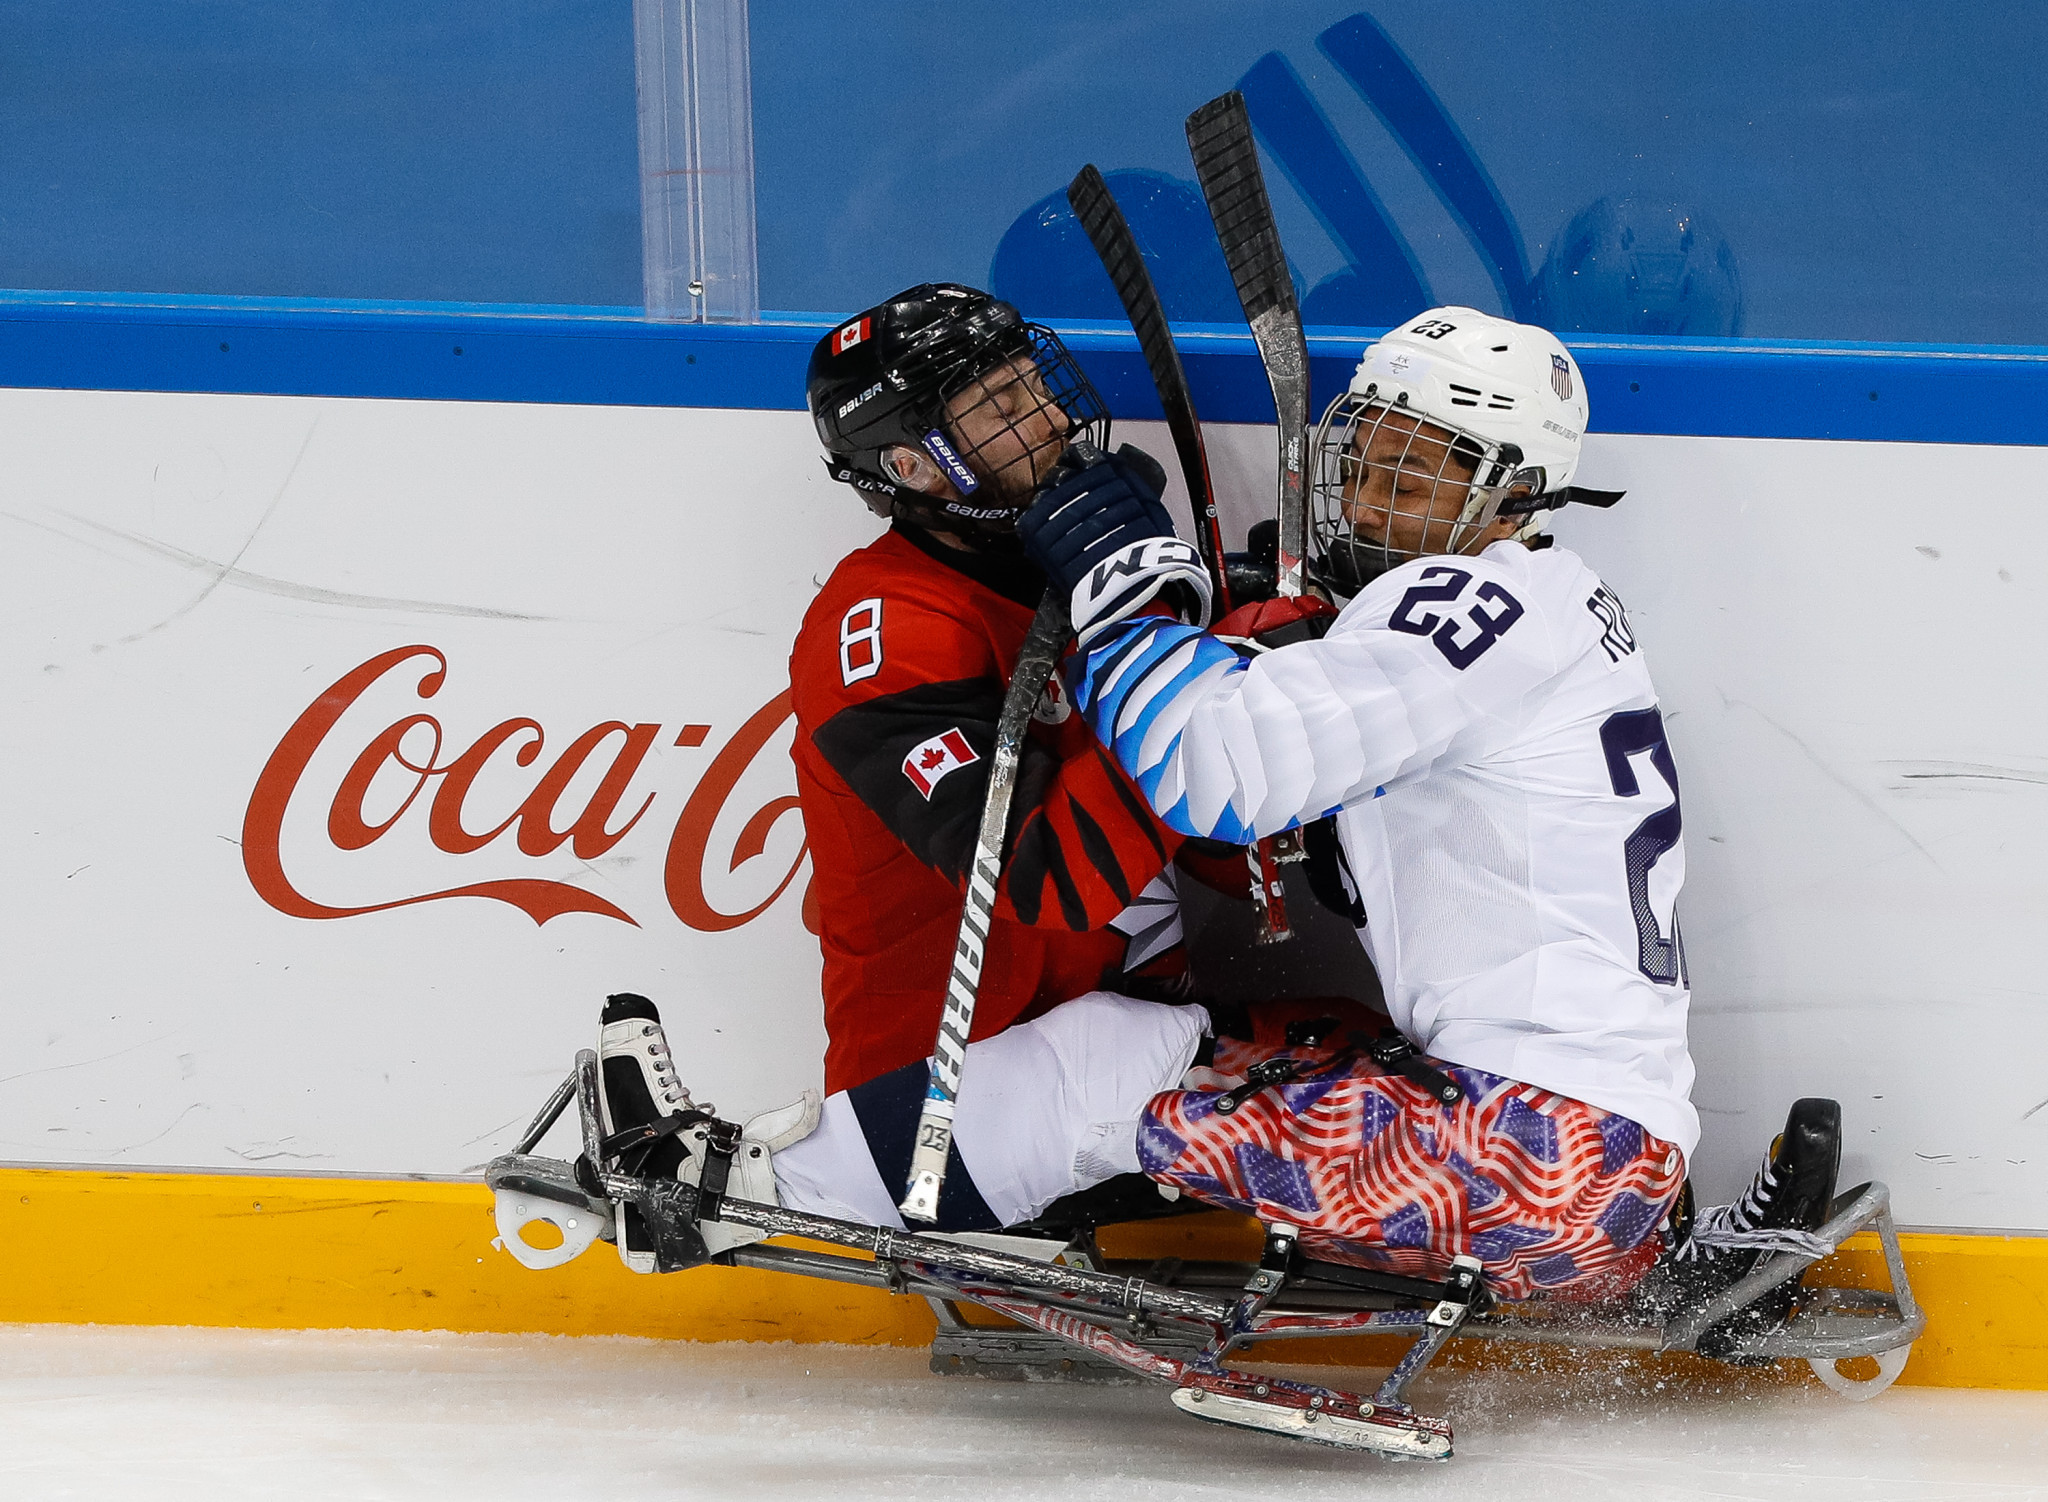 Canada and the United States will face eachother at the 2019 World Para Ice Hockey Championships in a rematch of the 2018 Pyeongchang Paralympic final, which the US won ©Getty Images